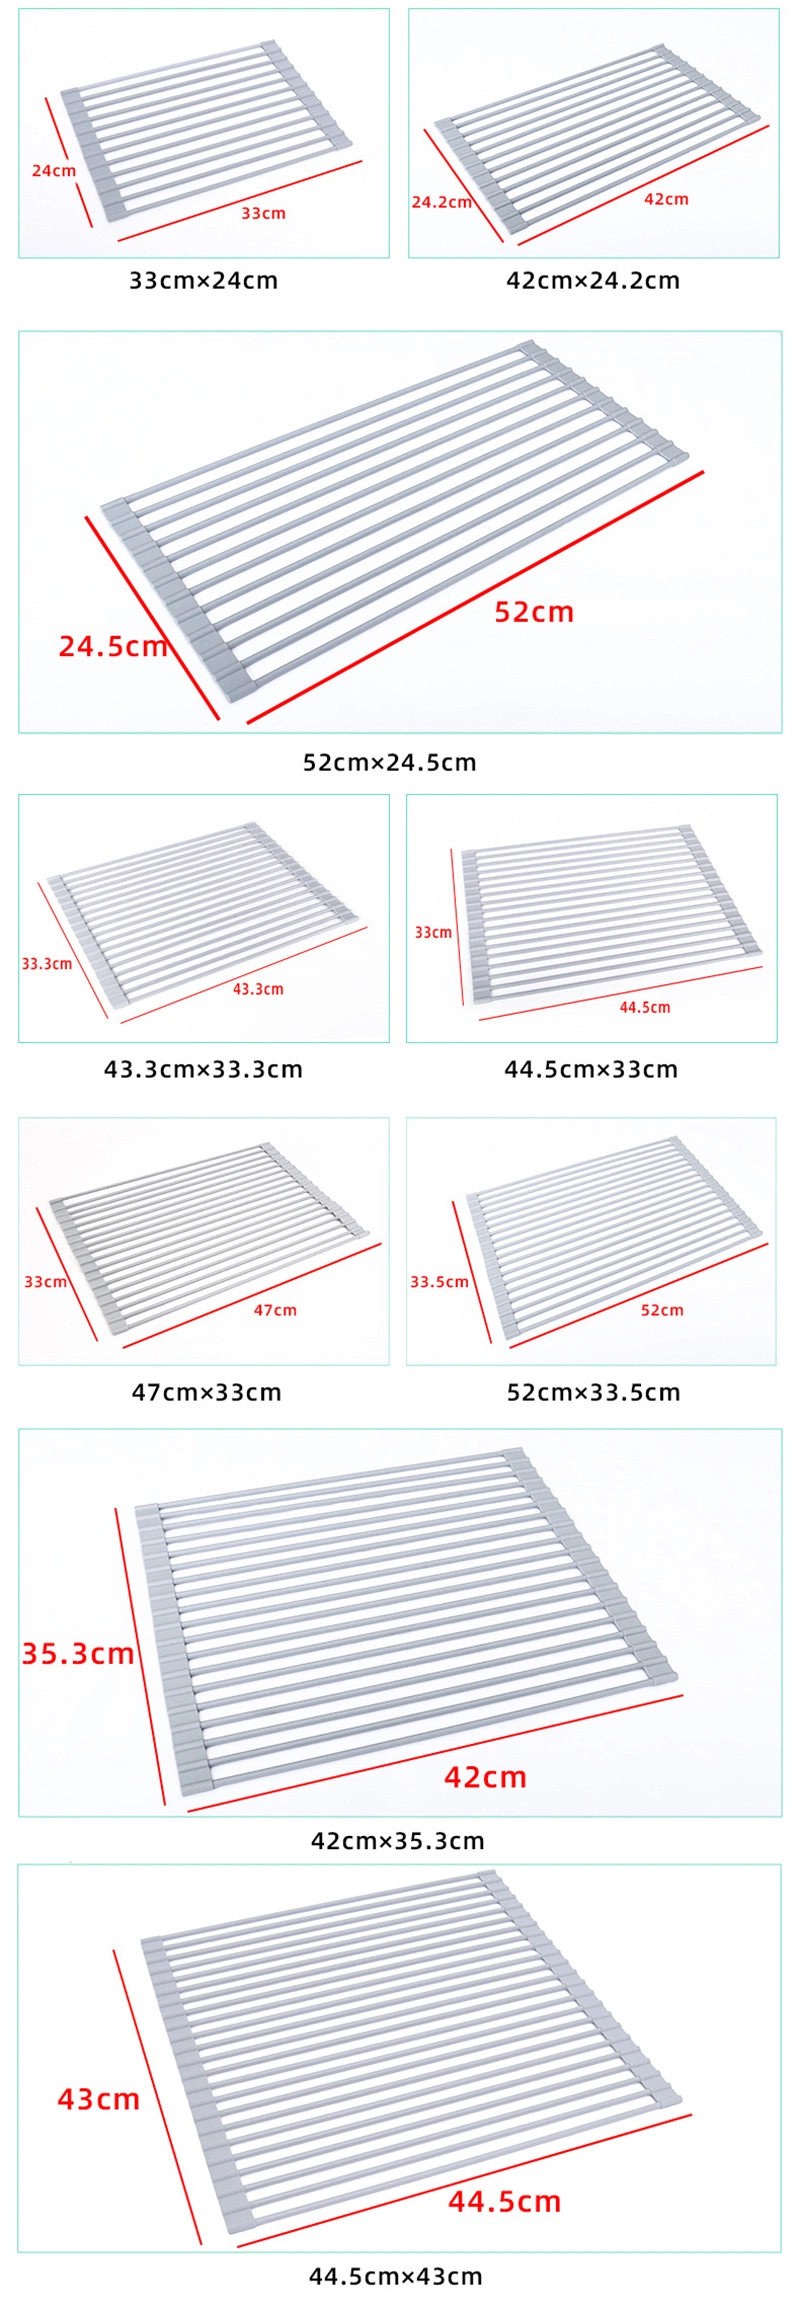 Silicone Roll up Dish Drying Rack Foldable Stainless Steel Over Sink Kitchen Drainer Rack for Cups Fruits Vegetables